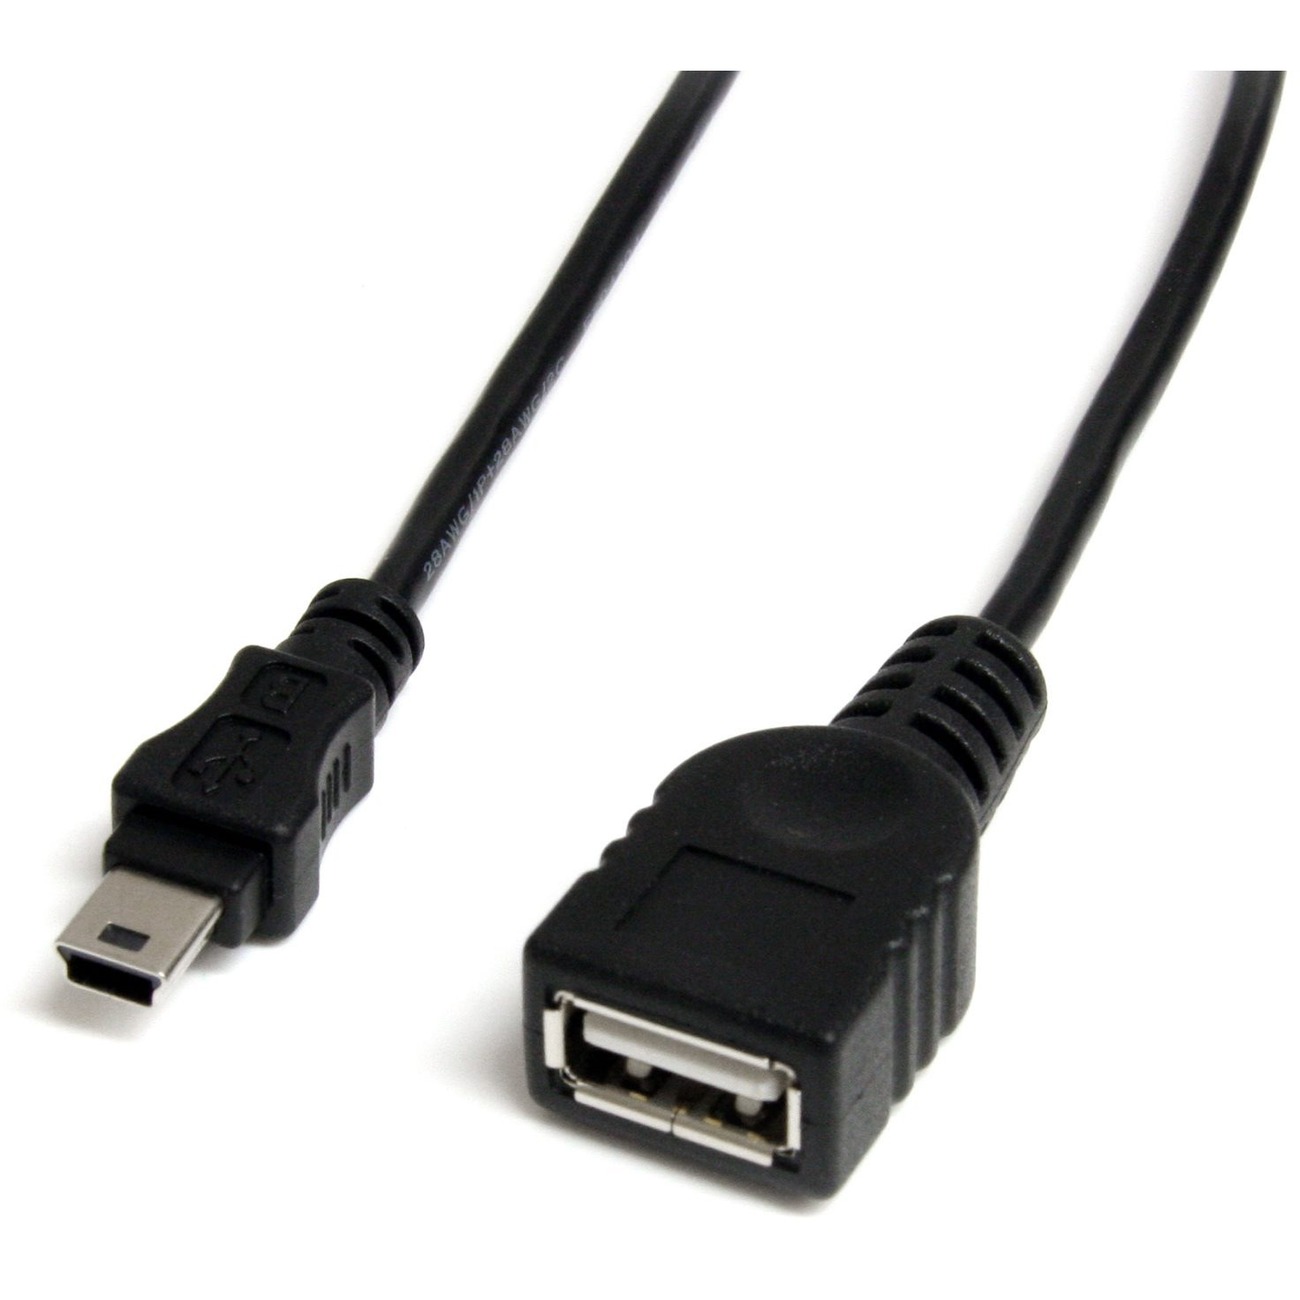 USB 2.0A Male to Mini USB 5 Pin B Data Charging Cable Cord Adapter 3Ft/1m  Black